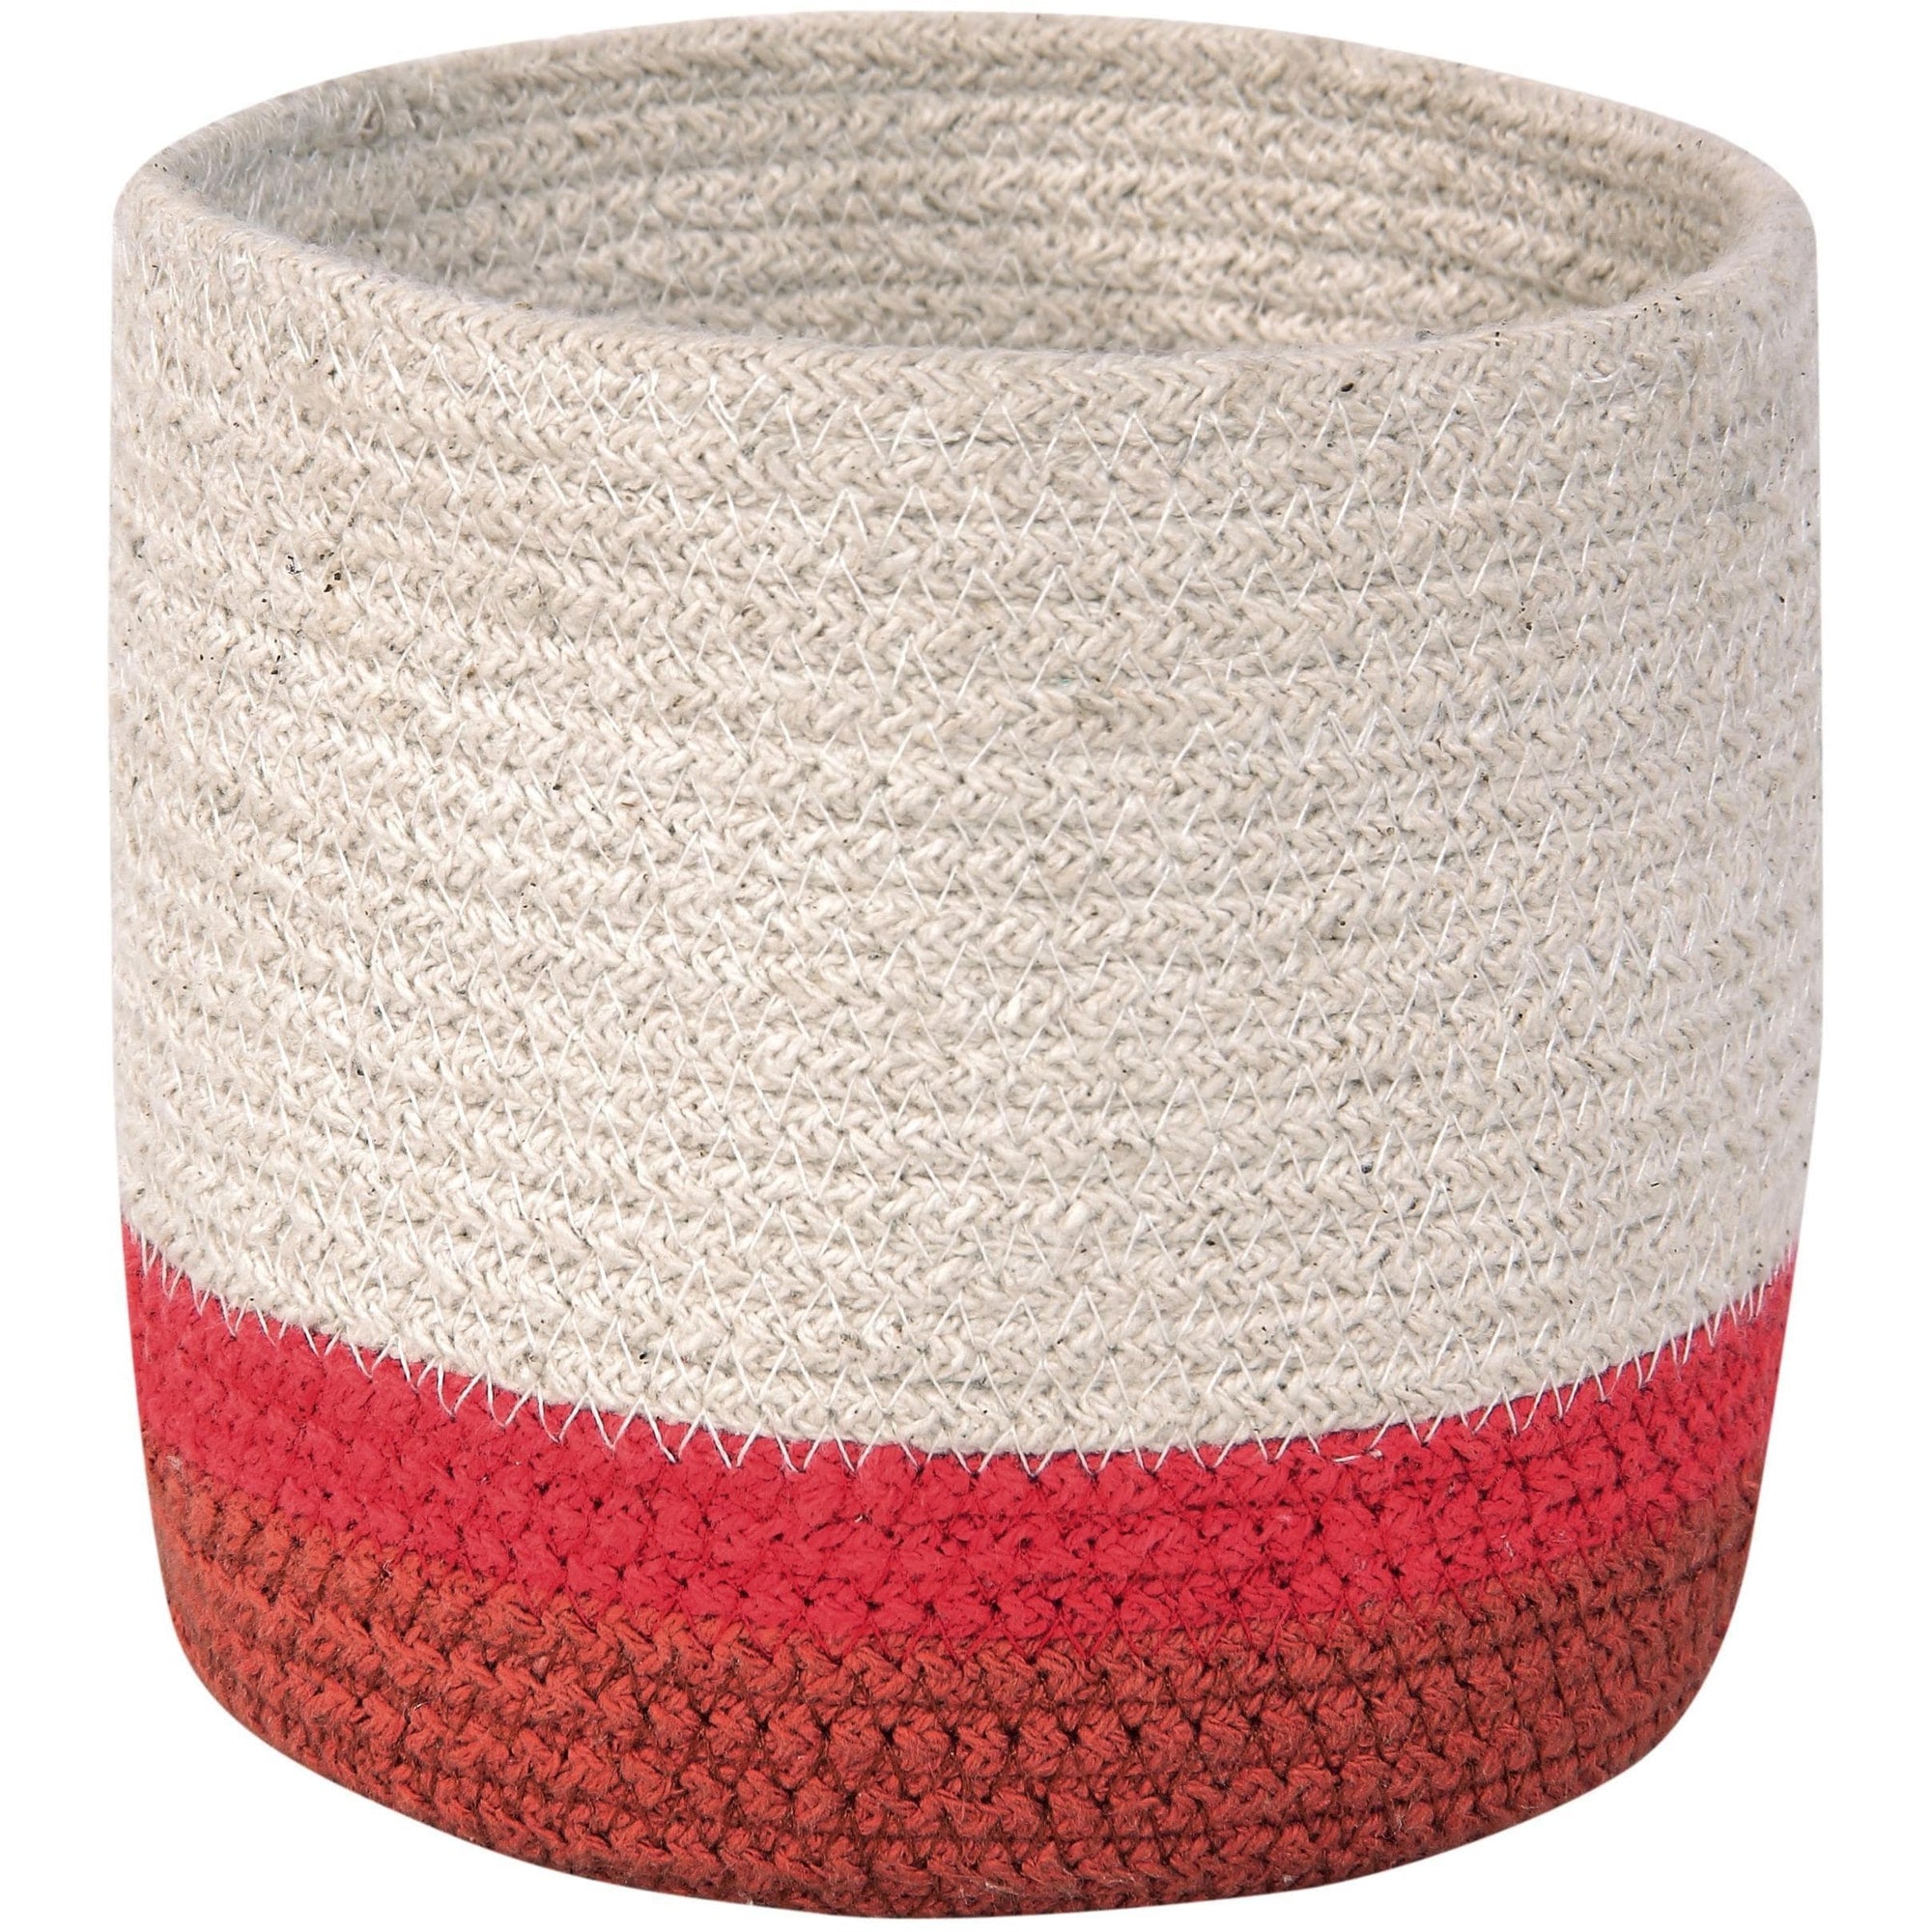 Rugs by Roo | Lorena Canals Mini Tricolor Natural Basket-BSK-TRIC-NAT